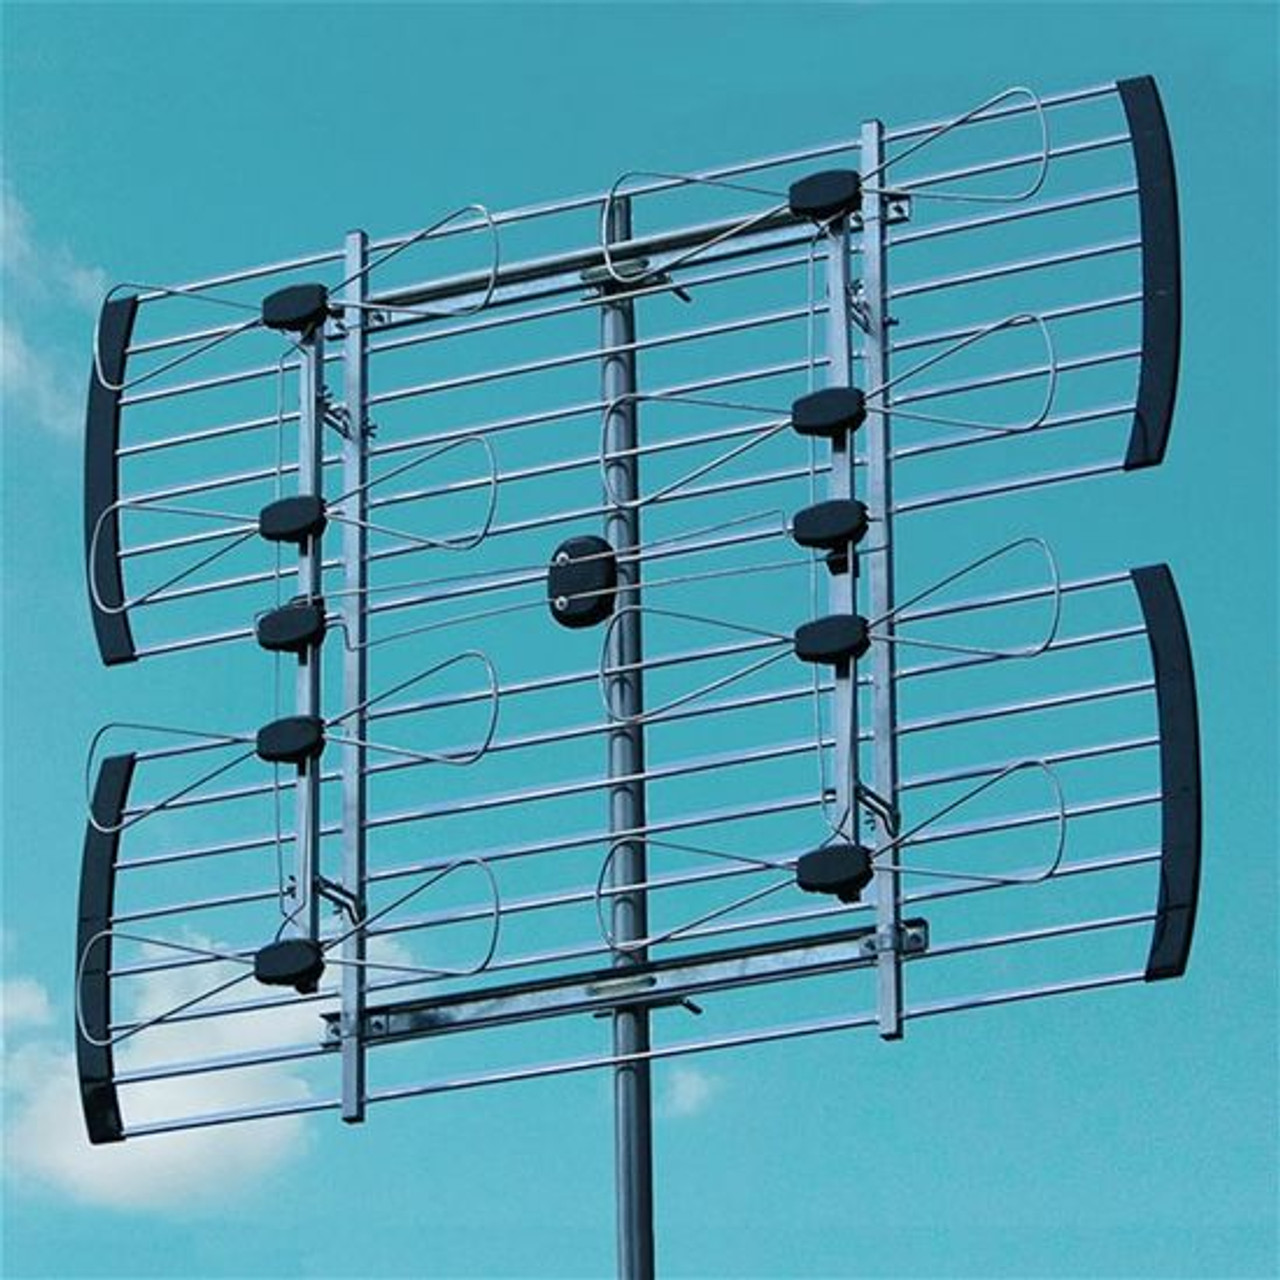 SKY BLUE SB48 UHF HEAVY DUTY SUPER 8 BAY ANTENNA FRINGE OUTDOOR TV DIGITAL UP TO 80 MILES MULTI-DIRECTIONAL HDTV  ALSO FREE 50 FT RG6 COAX CABLE